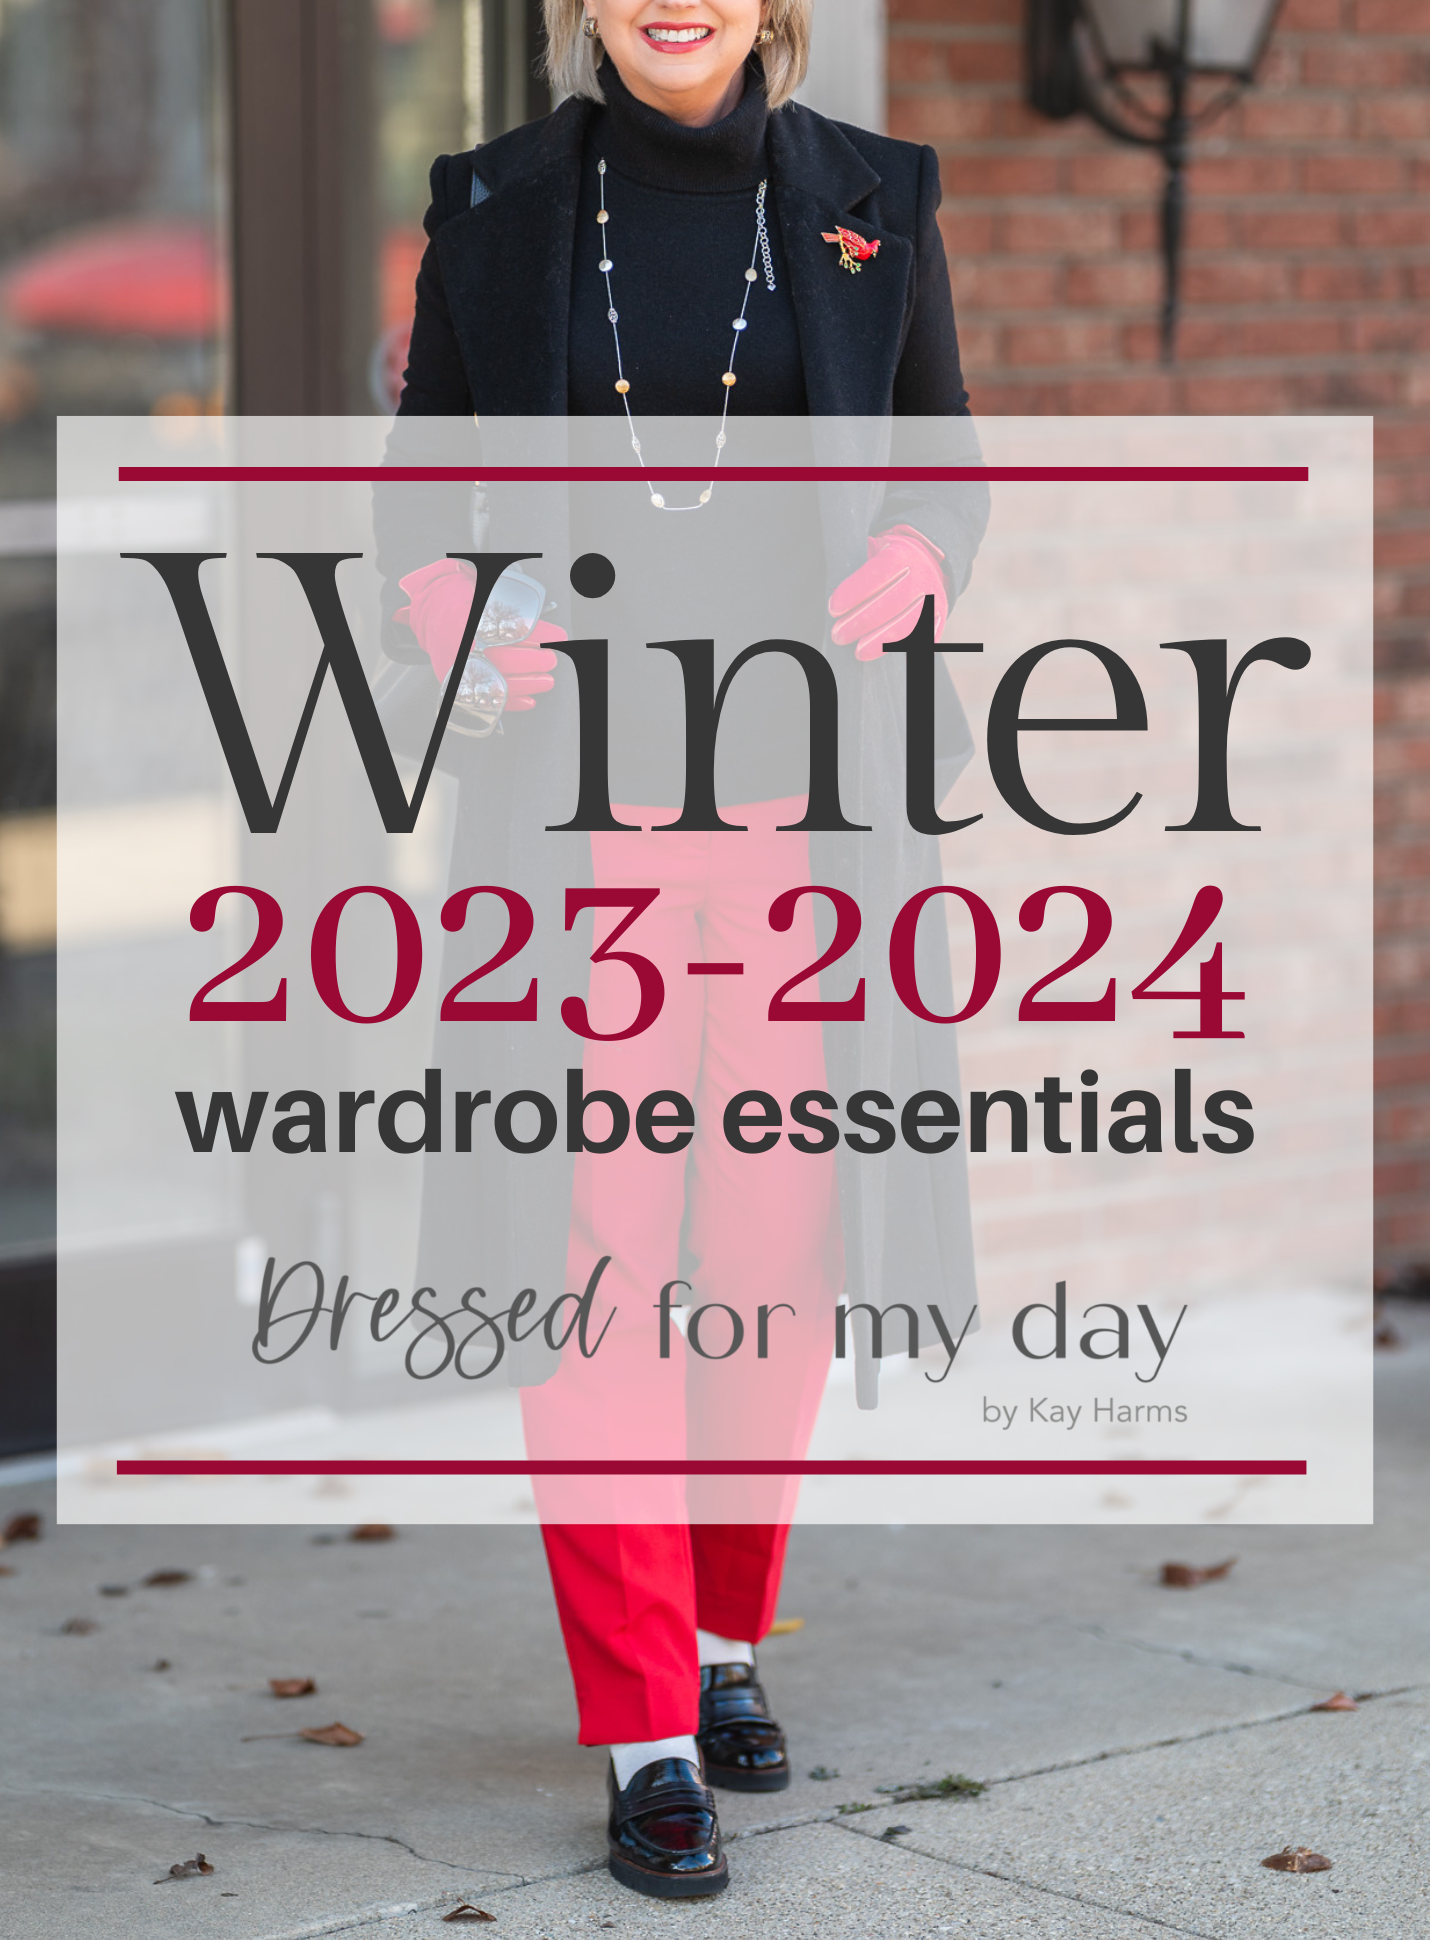 2023 Winter Fashion Trends: Must-Have Winter Outfits for a Stylish